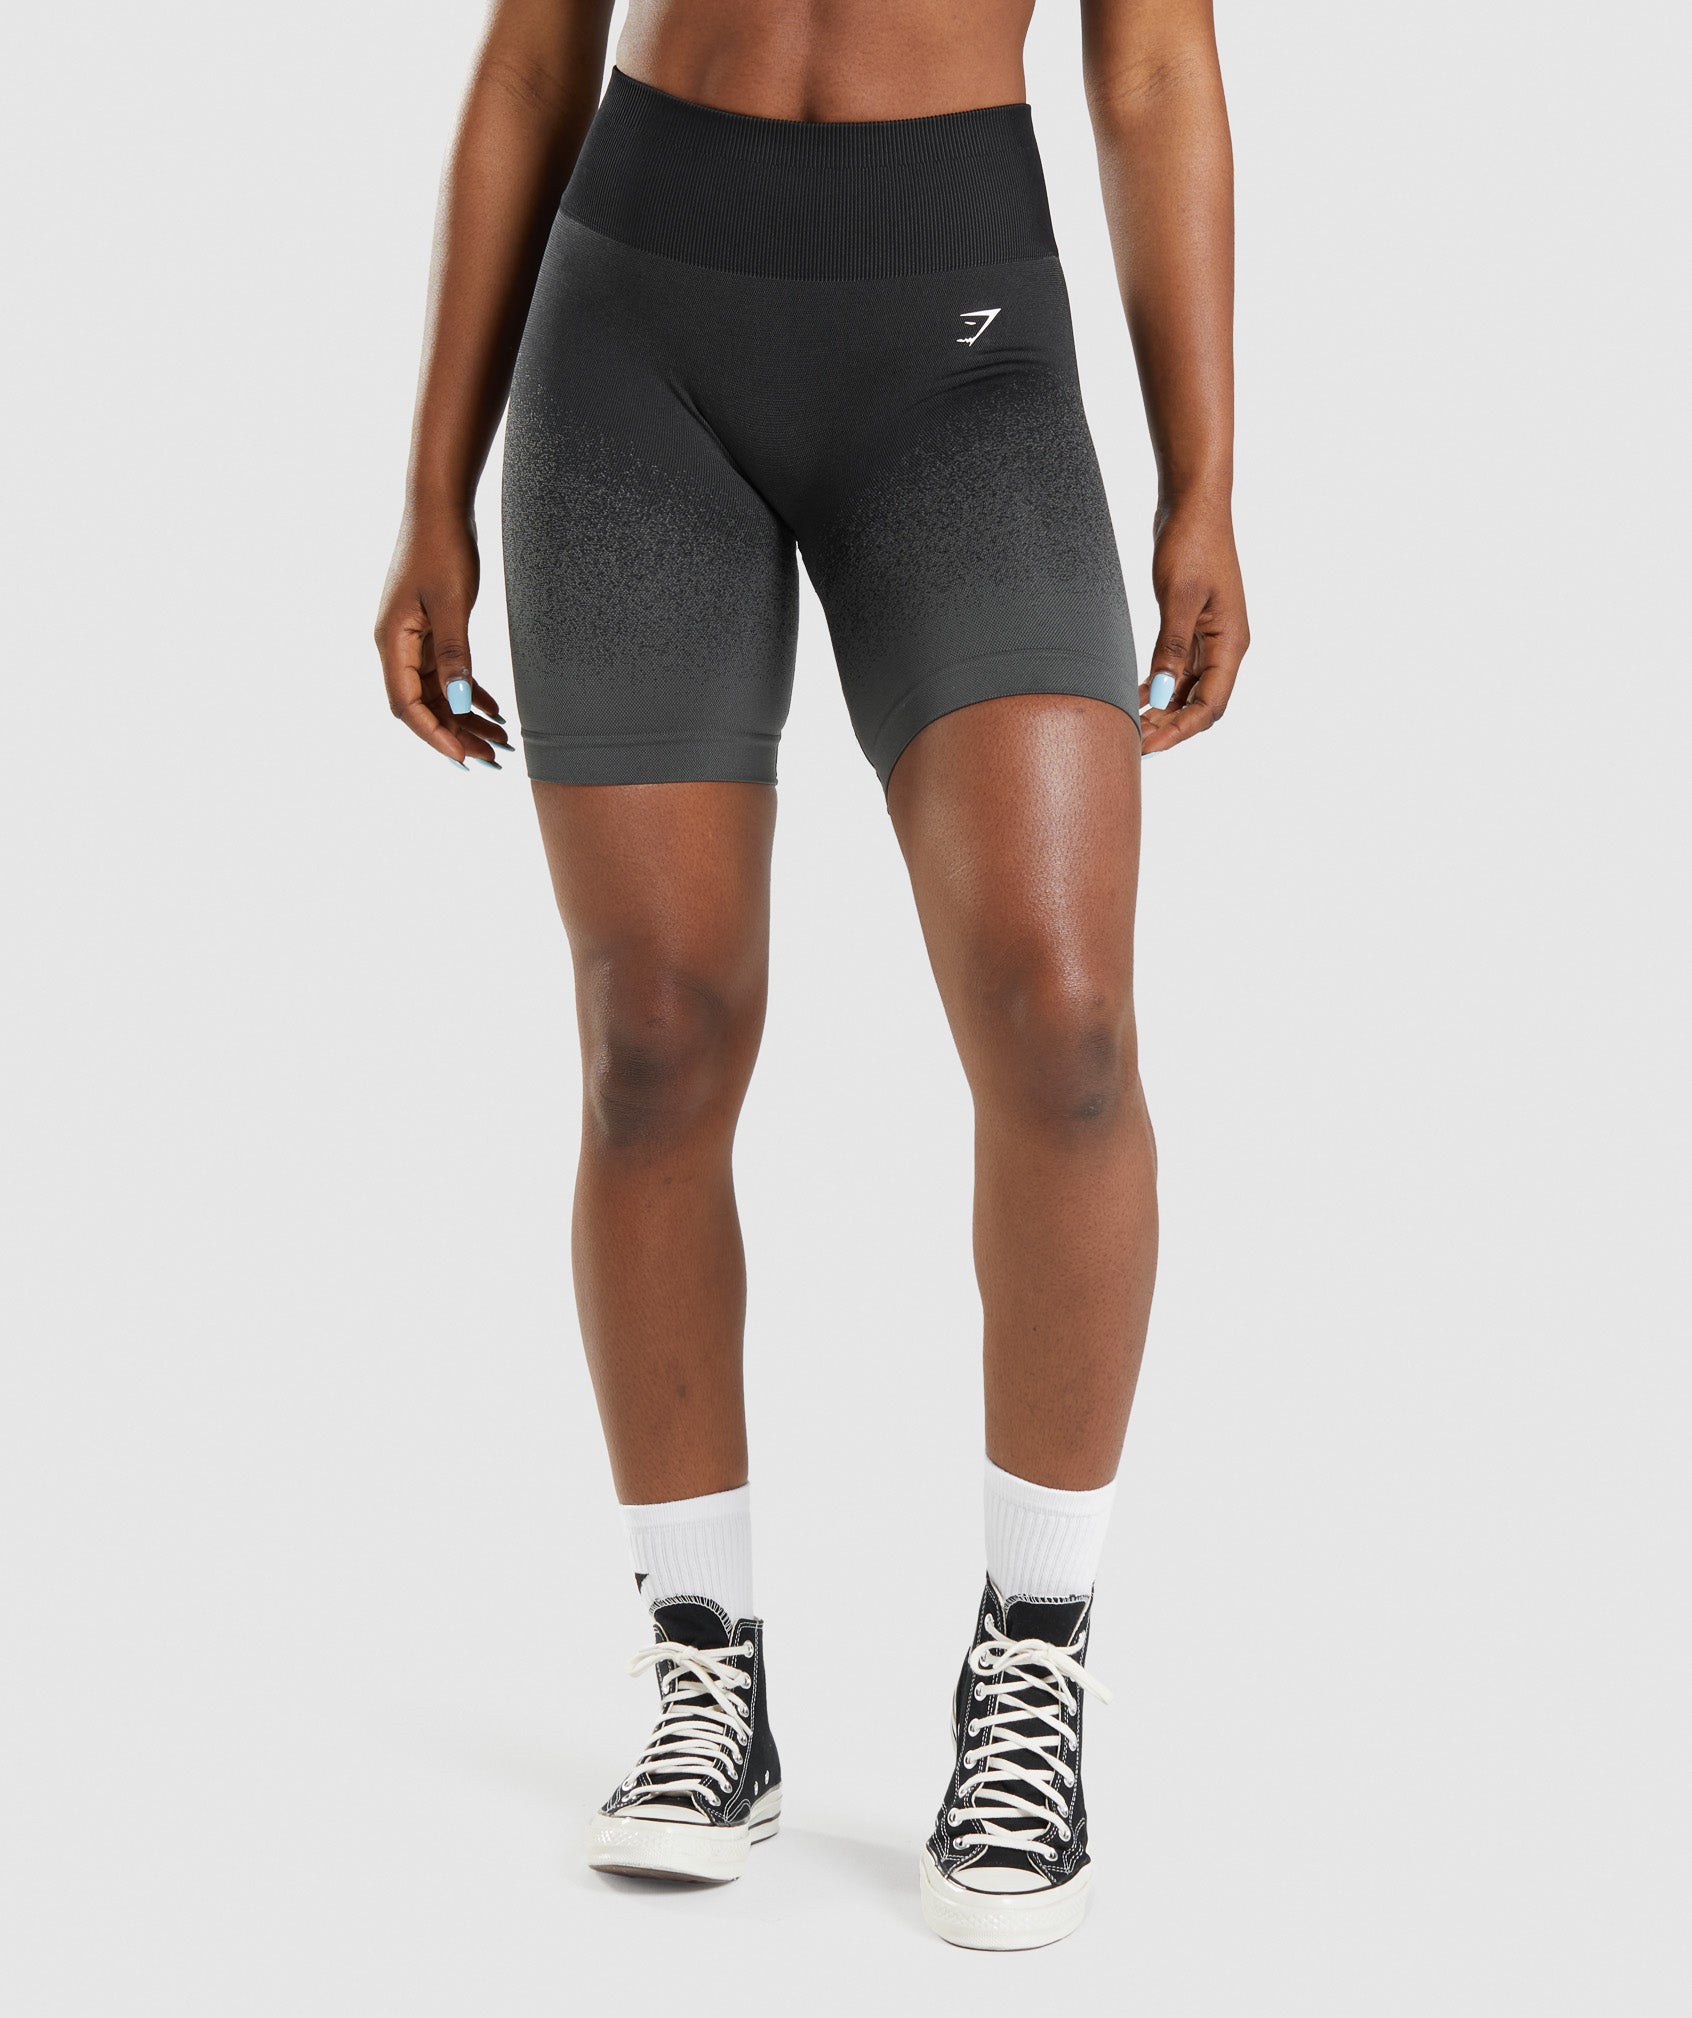 Adapt Ombre Seamless Cycling Shorts in Black/Grey - view 1